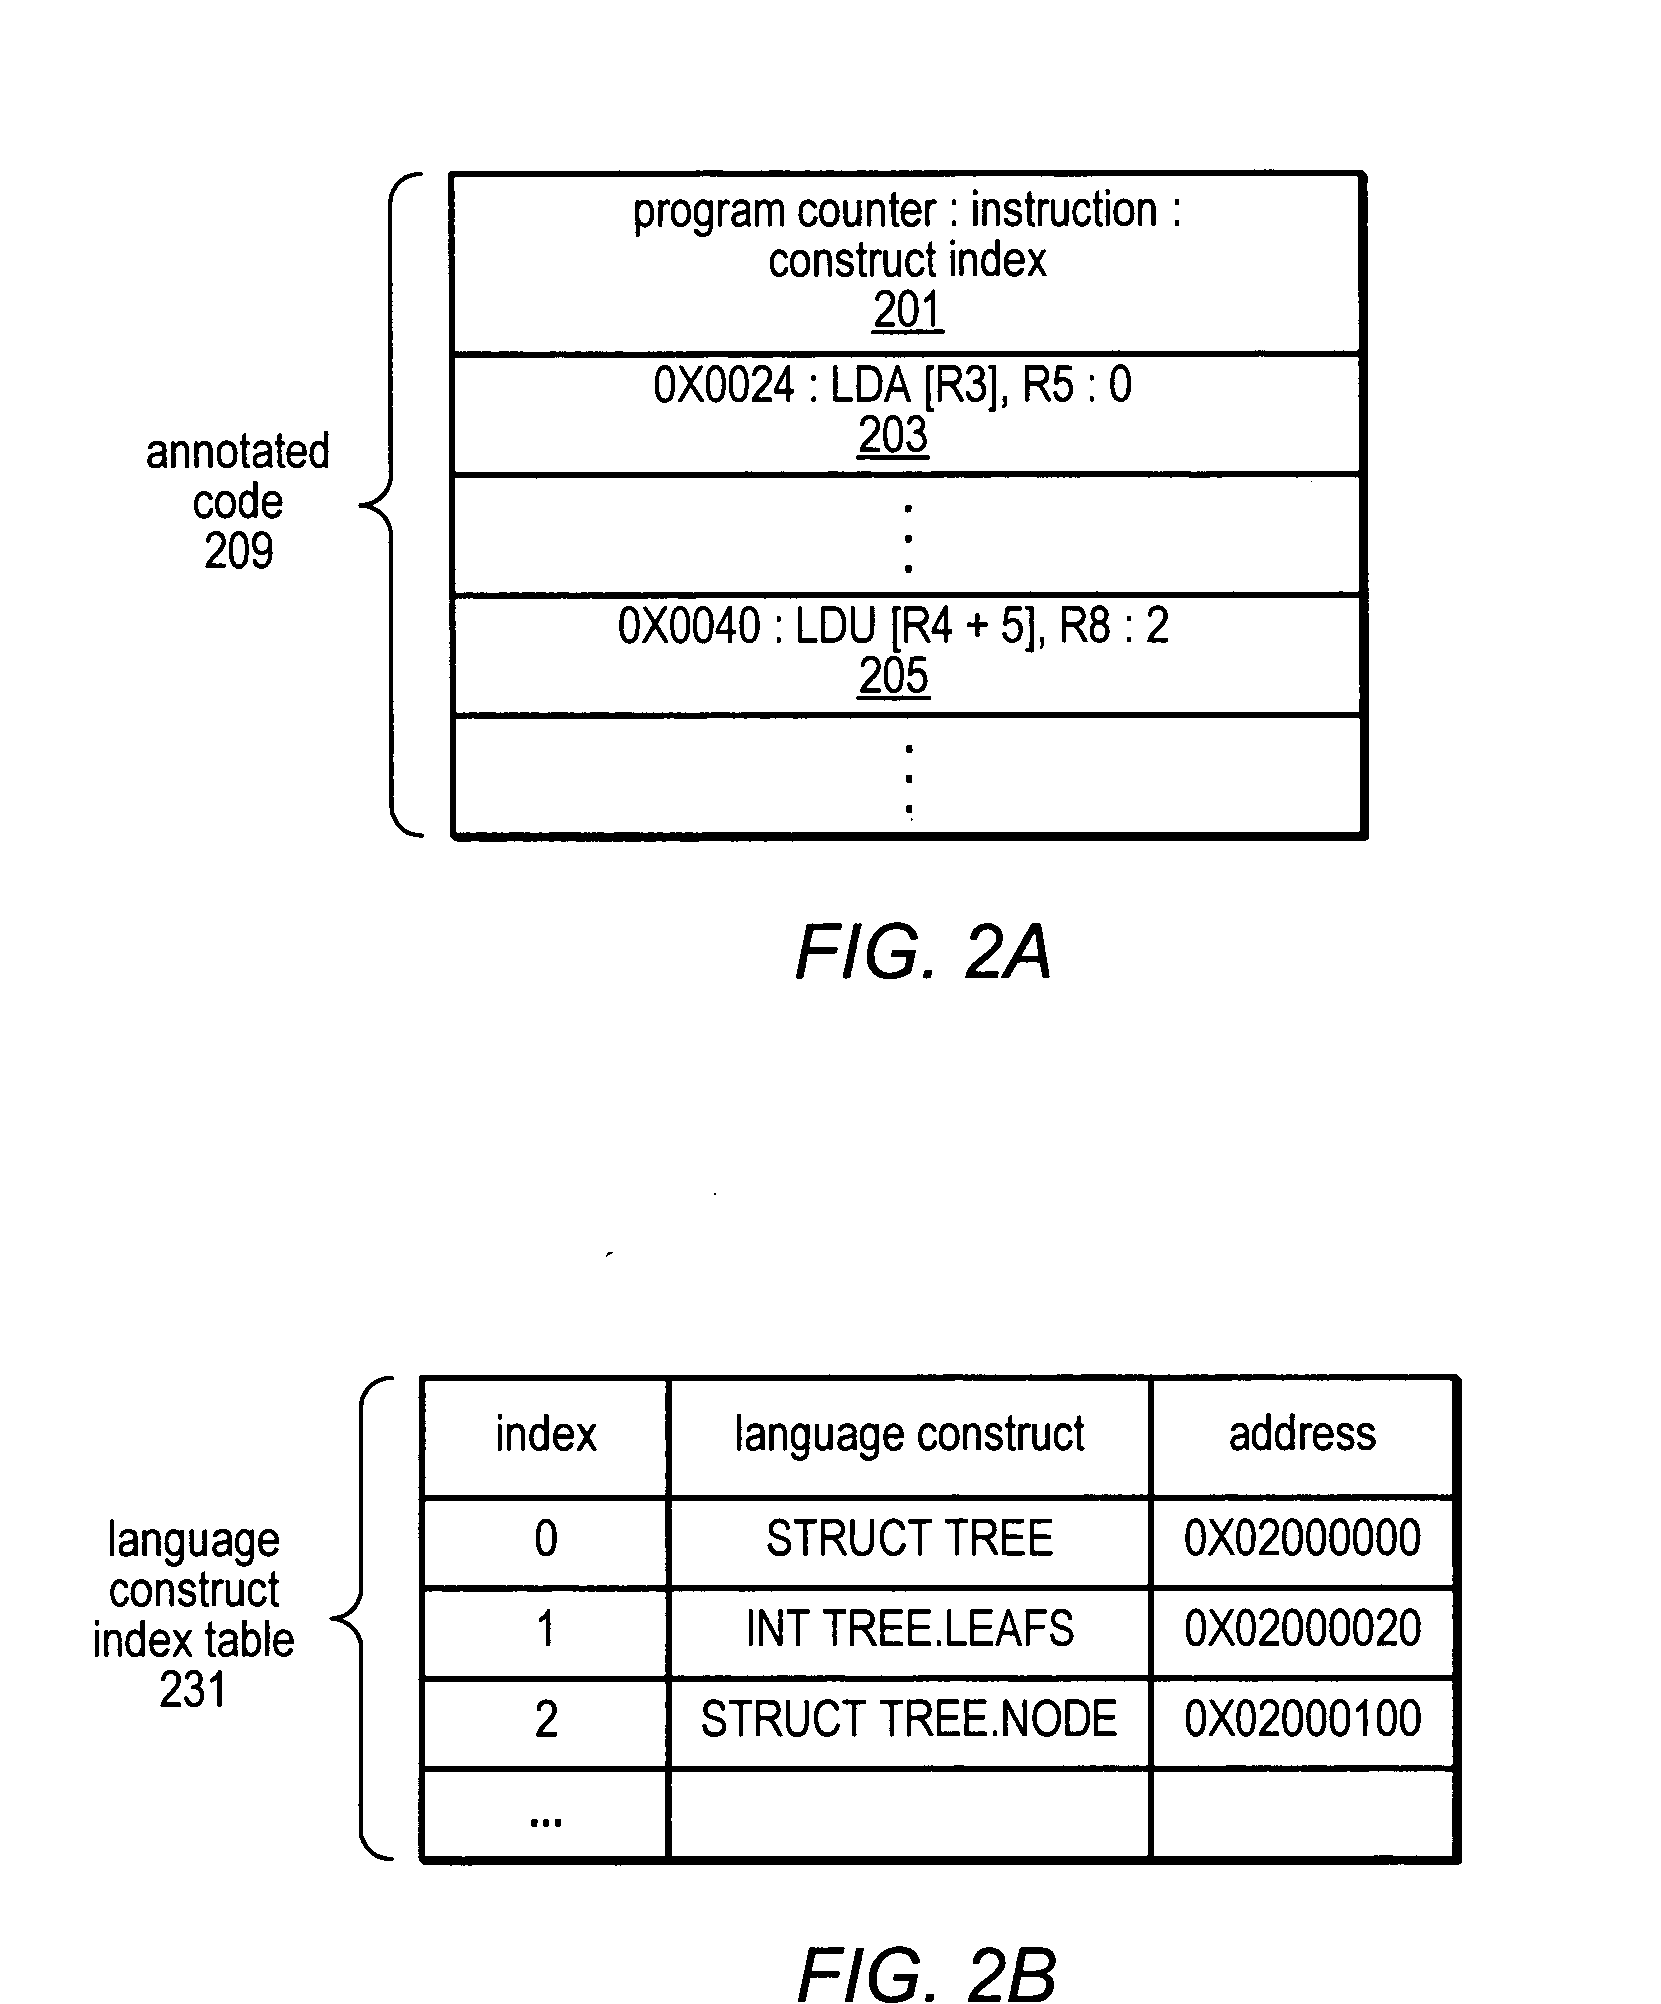 Method and apparatus for identifying instructions associated with execution events in a data space profiler